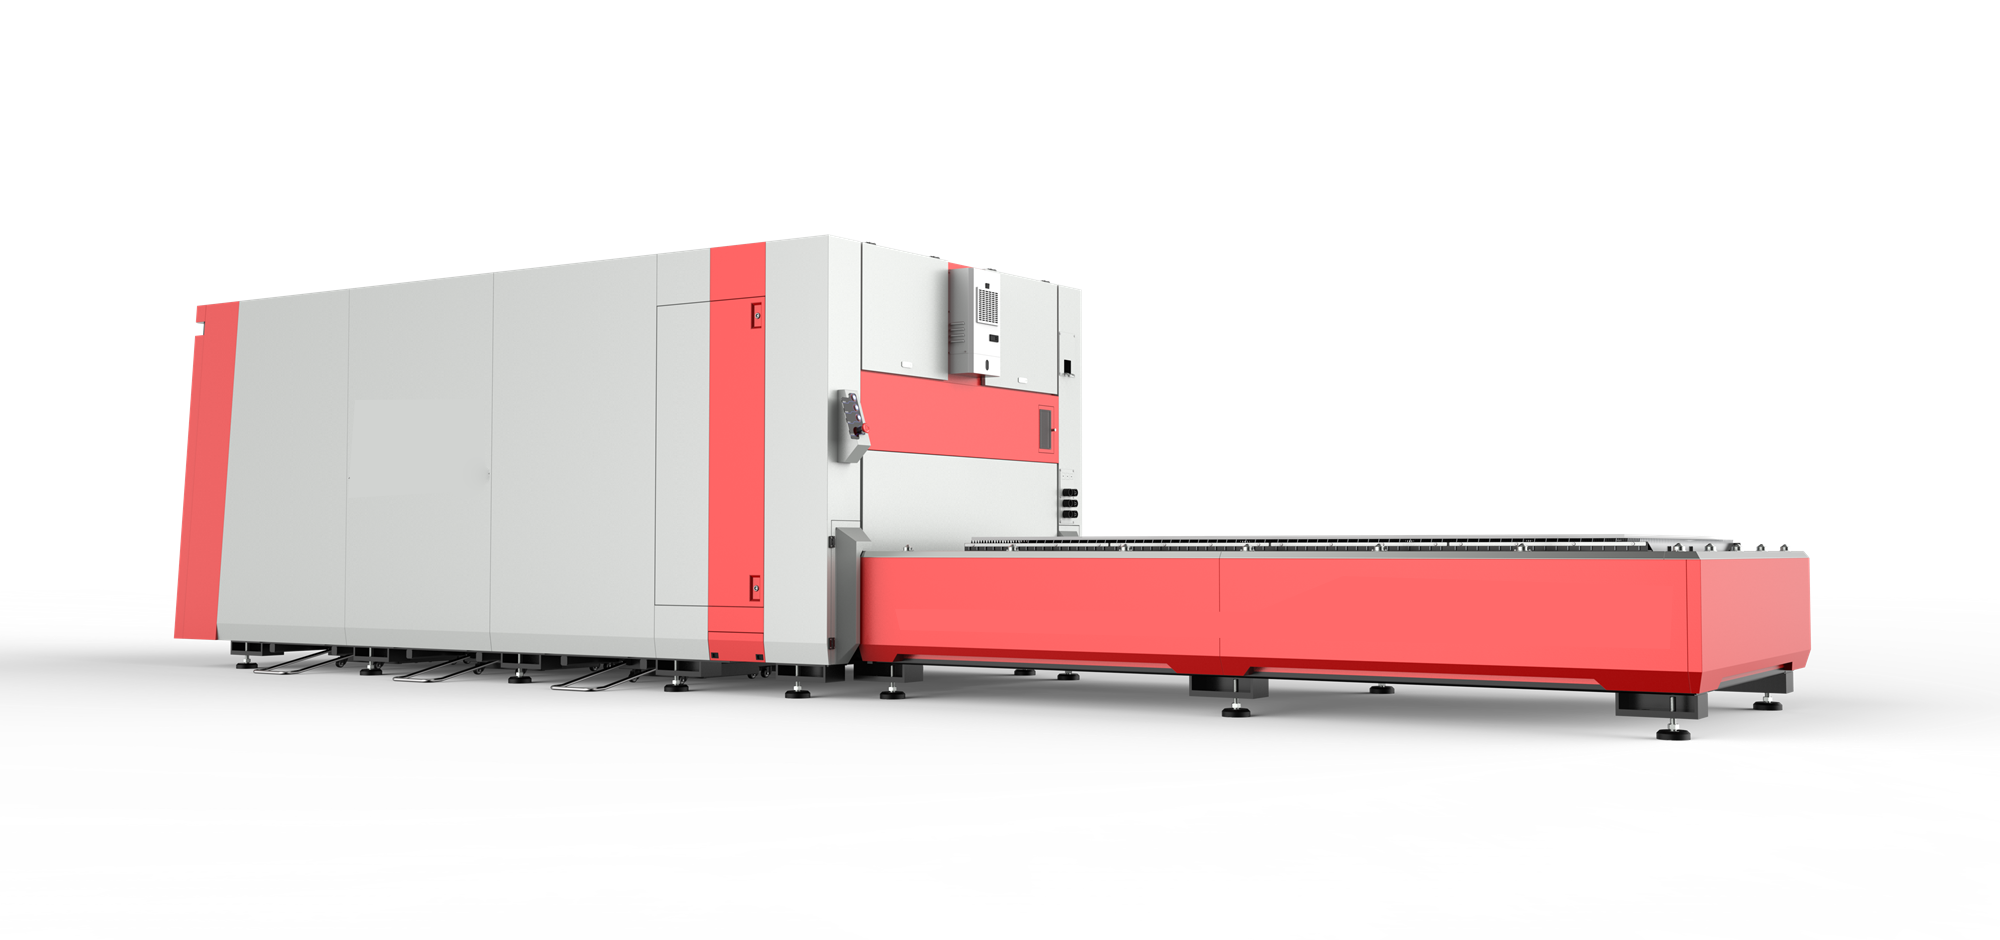 High Quality Cypcut 3015 Metal fiber Laser Cutting Machines with full surrounding enclosure Featured Image